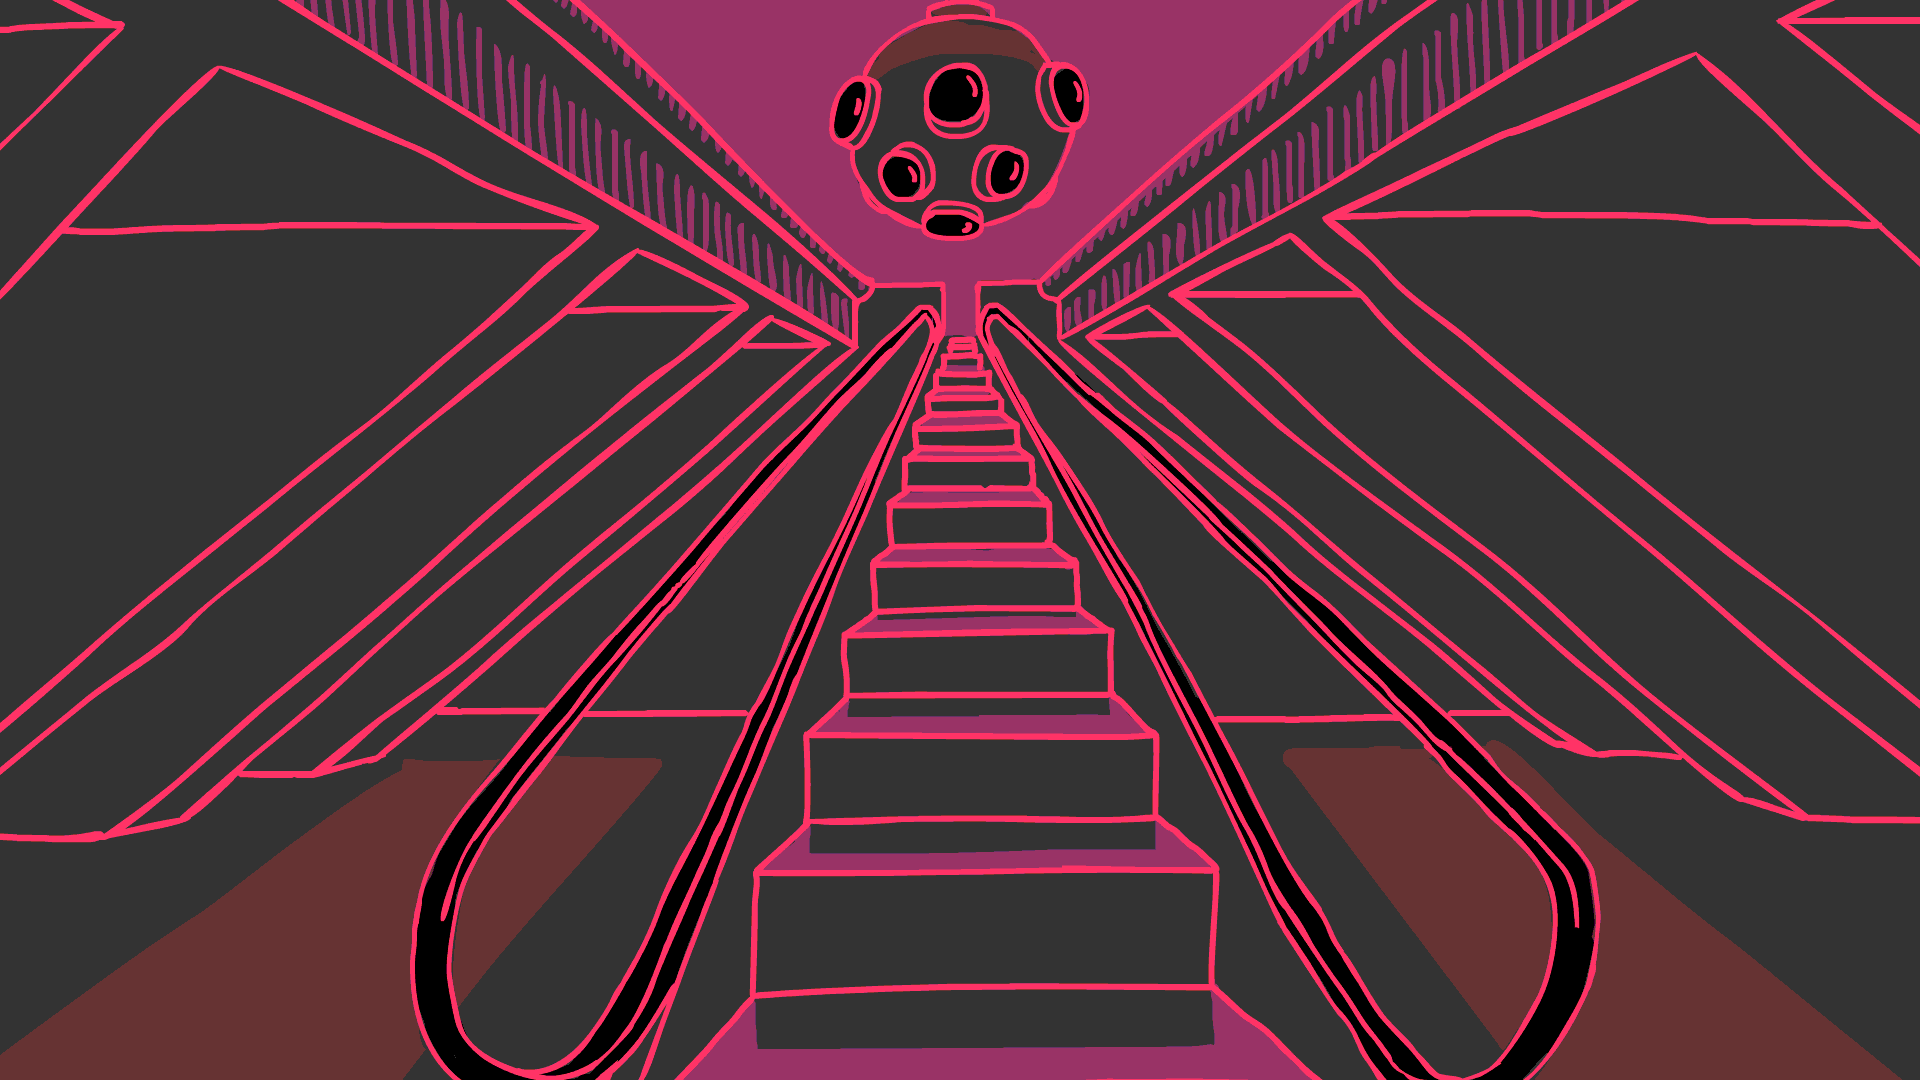 Sexy Escalator By Alastair Mccoll Animation And Illustration Find And Share On Giphy 8574